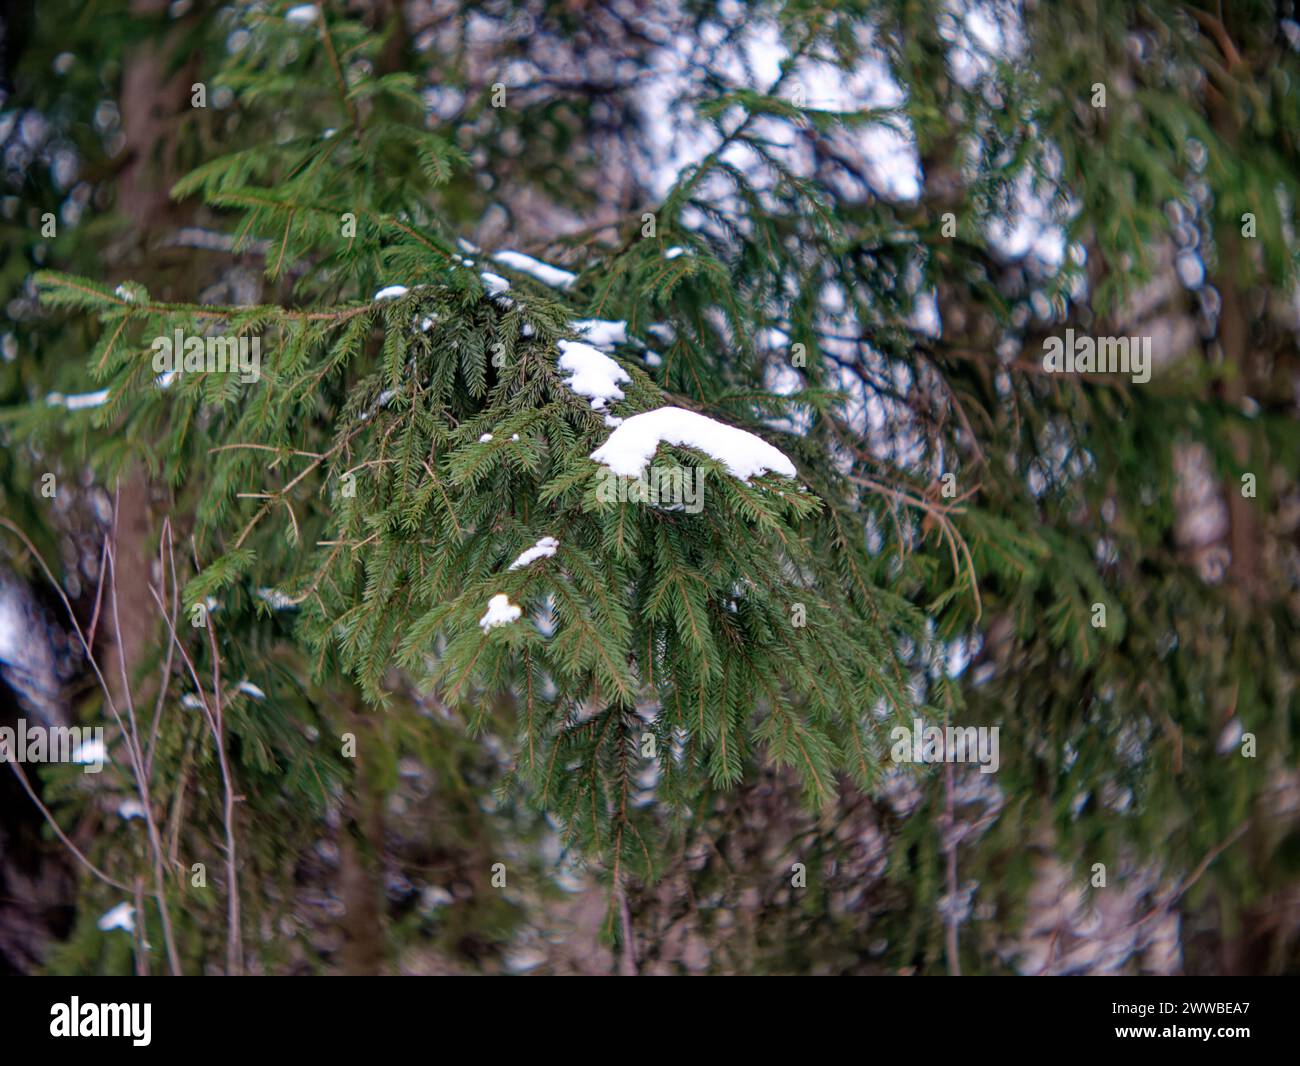 Spruce branch on a tree in winter, close-up Stock Photo